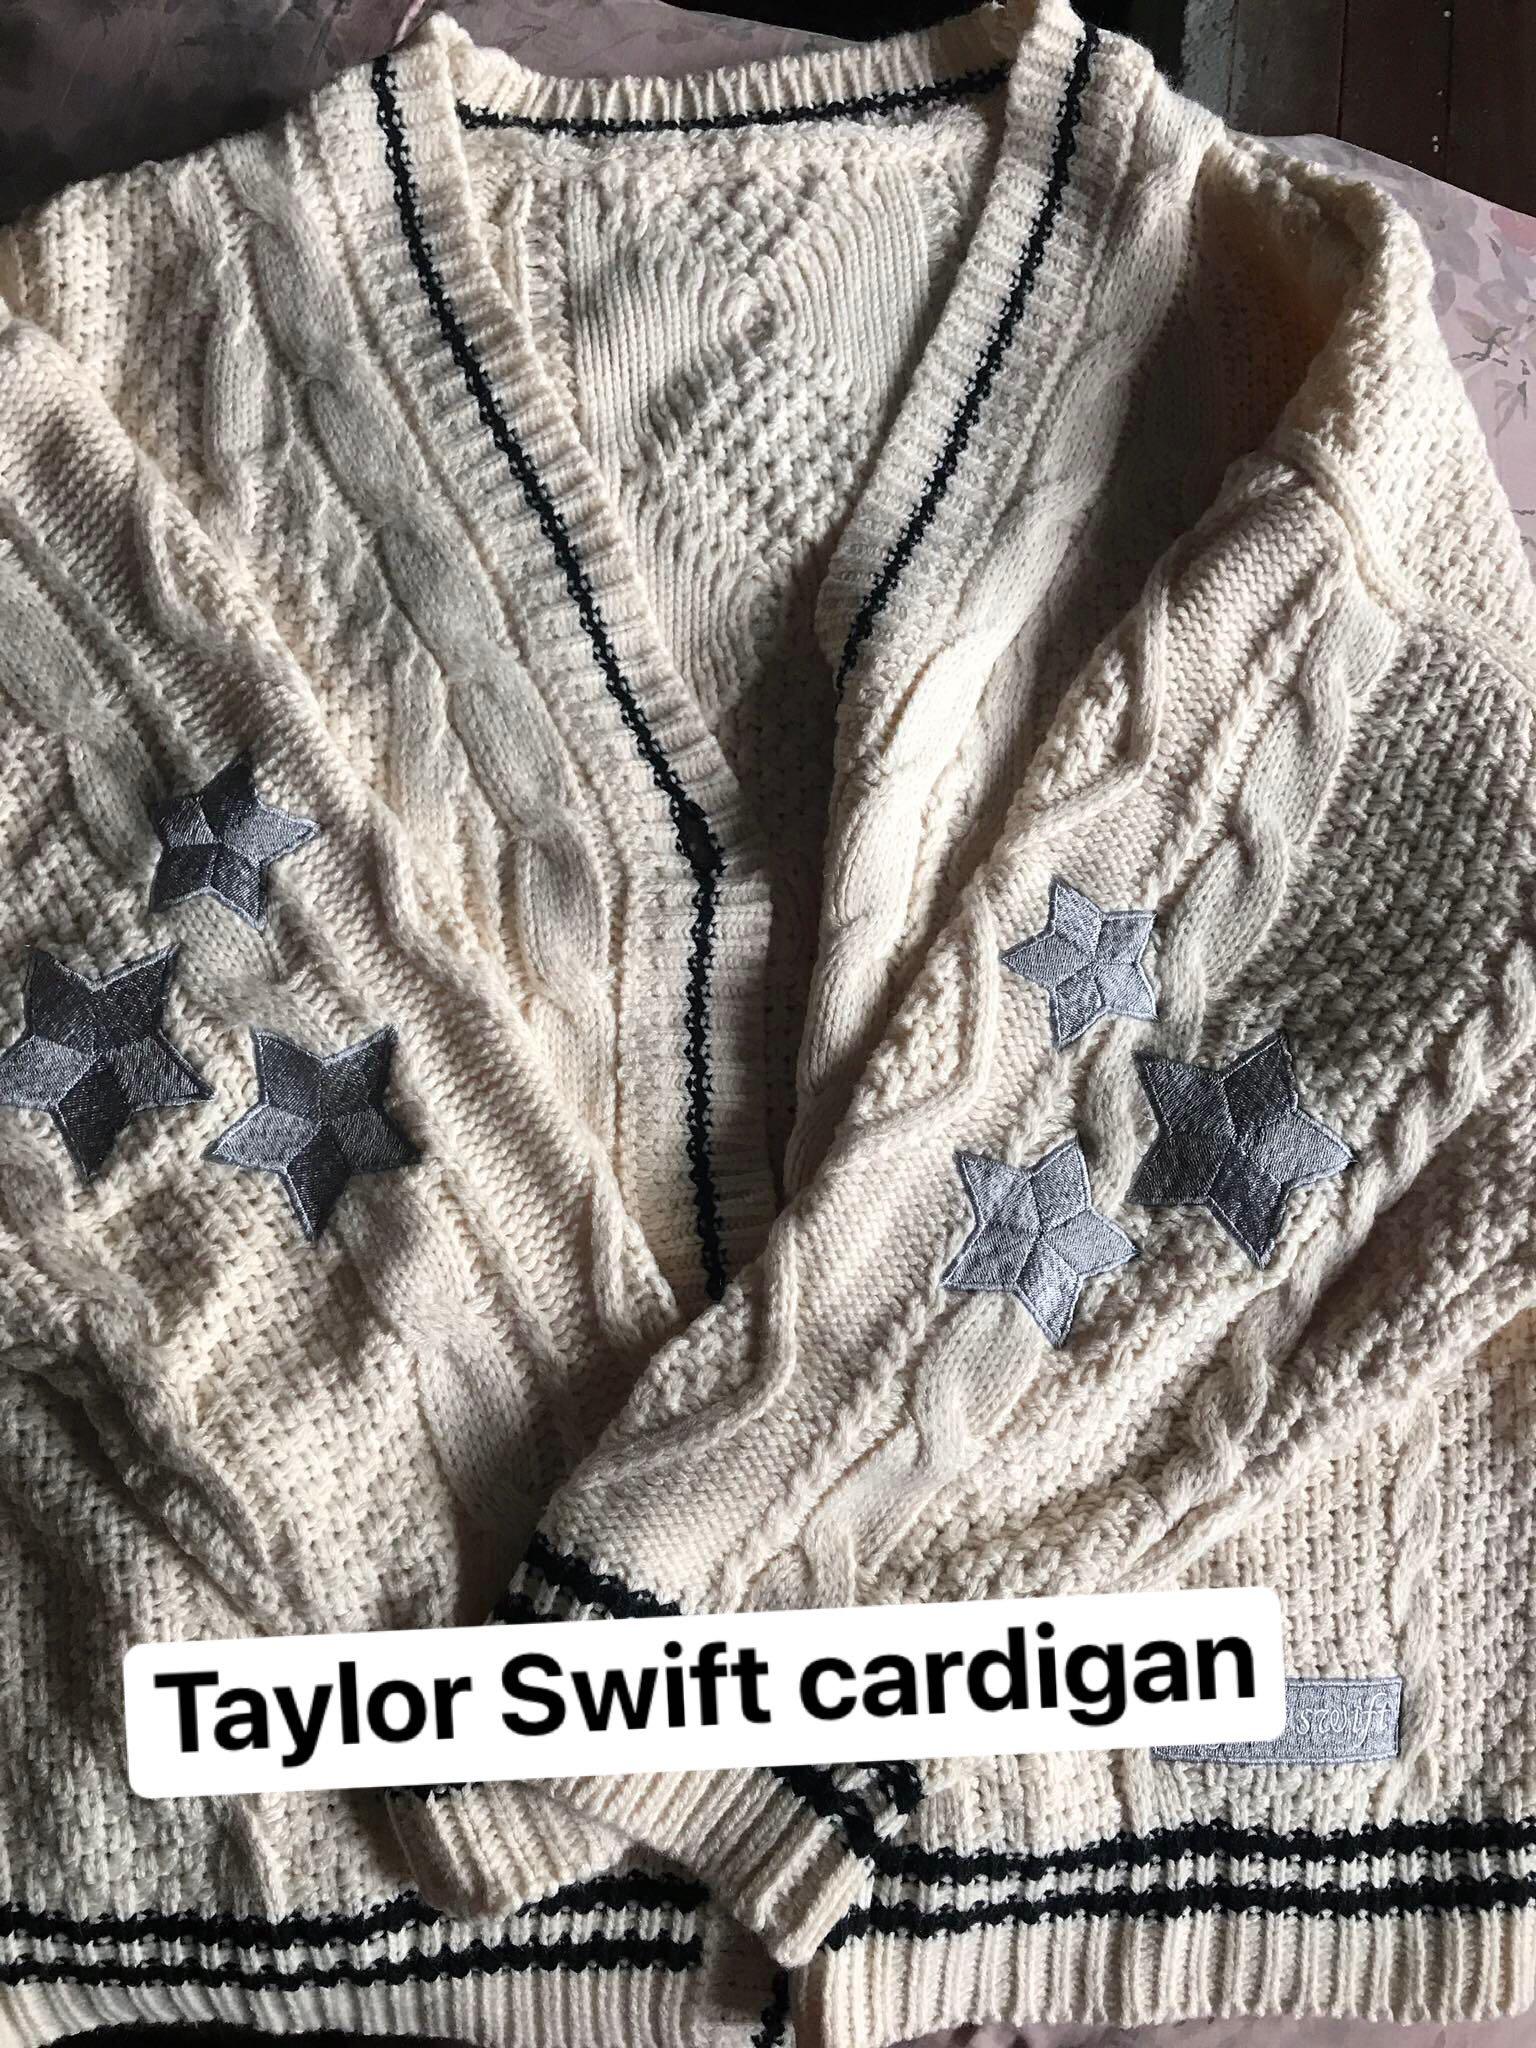 Maquillage PH Est2014 - USA Pasabuy - Rare Taylor Swift Cardigan! Folklore  Patch in M/L ONHAND 1pc only Taylor Swift Patch in XS/S ONHAND 2pcs only  READY TO SHIP ✓✓✓